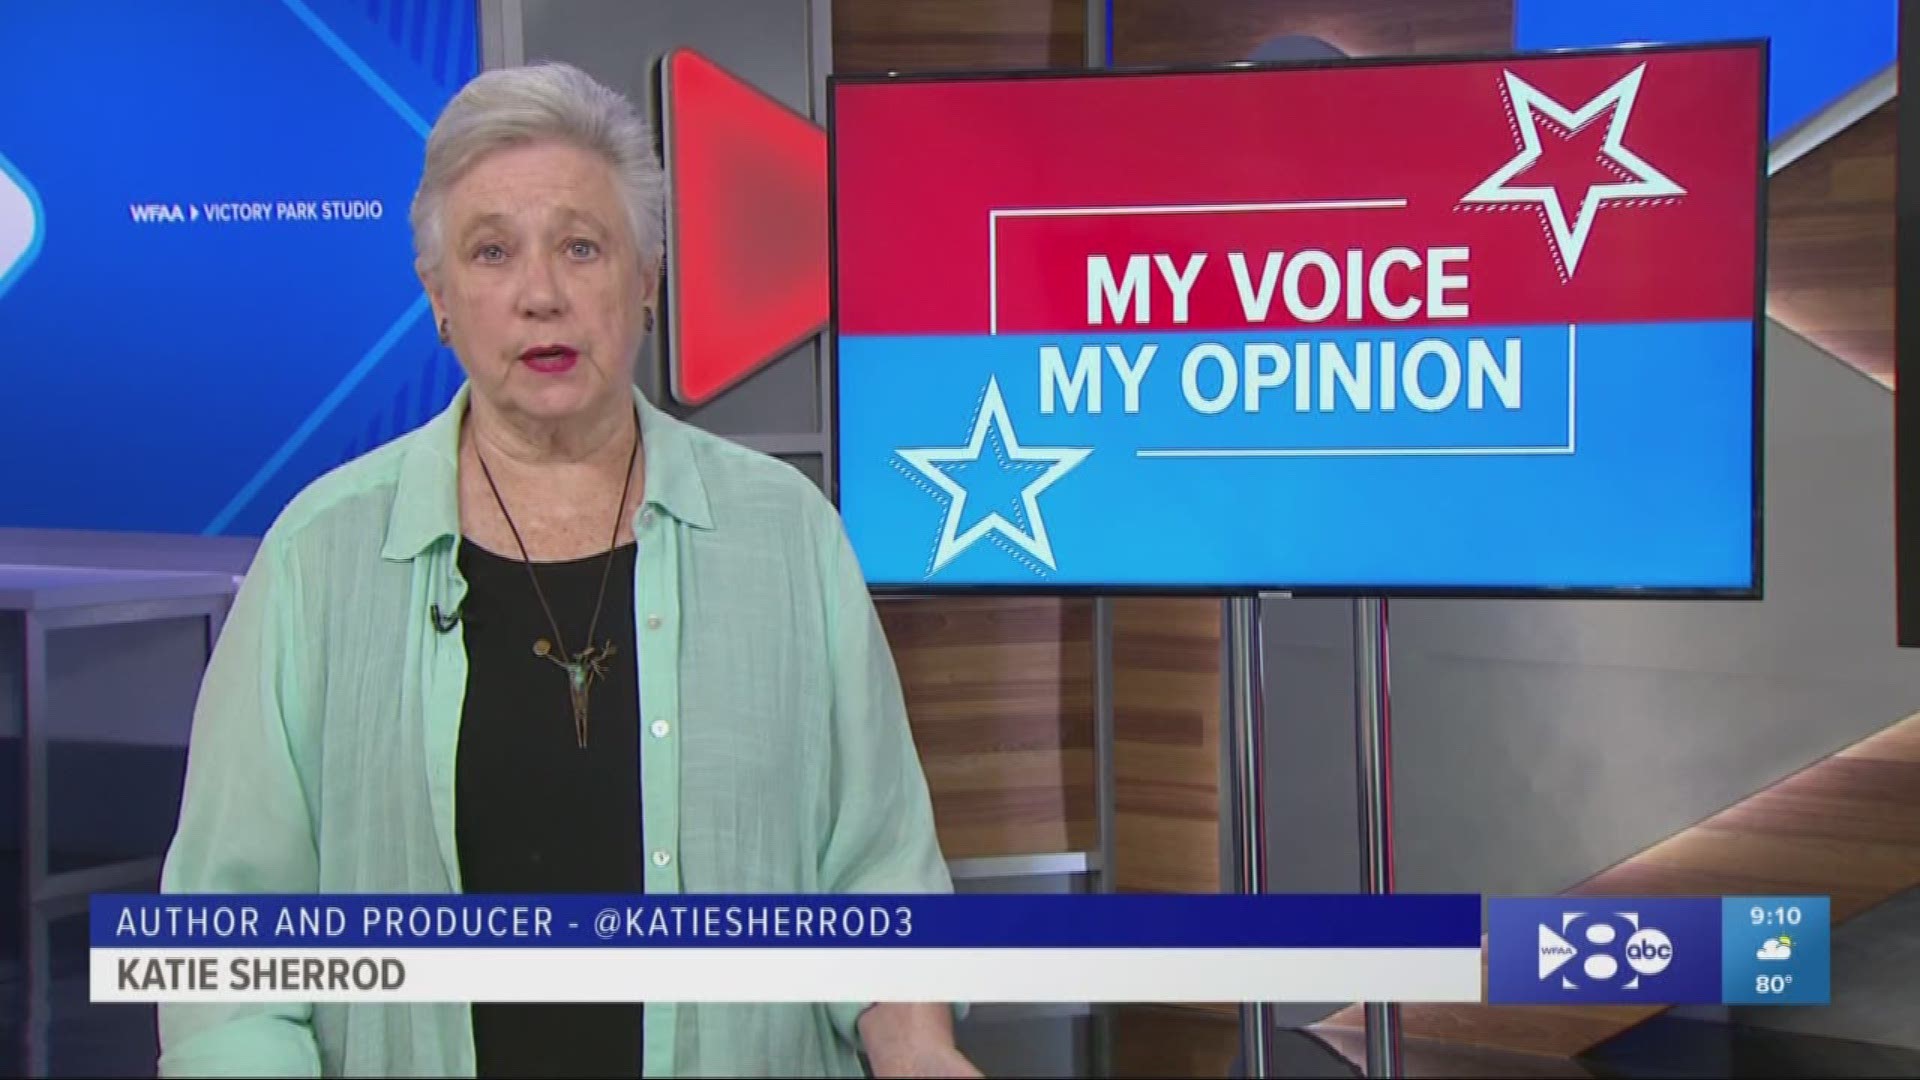 The term "fake news" was originally coined to describe fictitious articles -- sometimes by Russians -- to stoke political divisions among us. However, President Trump uses the term to attack stories he dislikes. Author and producer Katie Sherrod discussed this topic in this week’s My Voice, My Opinion.